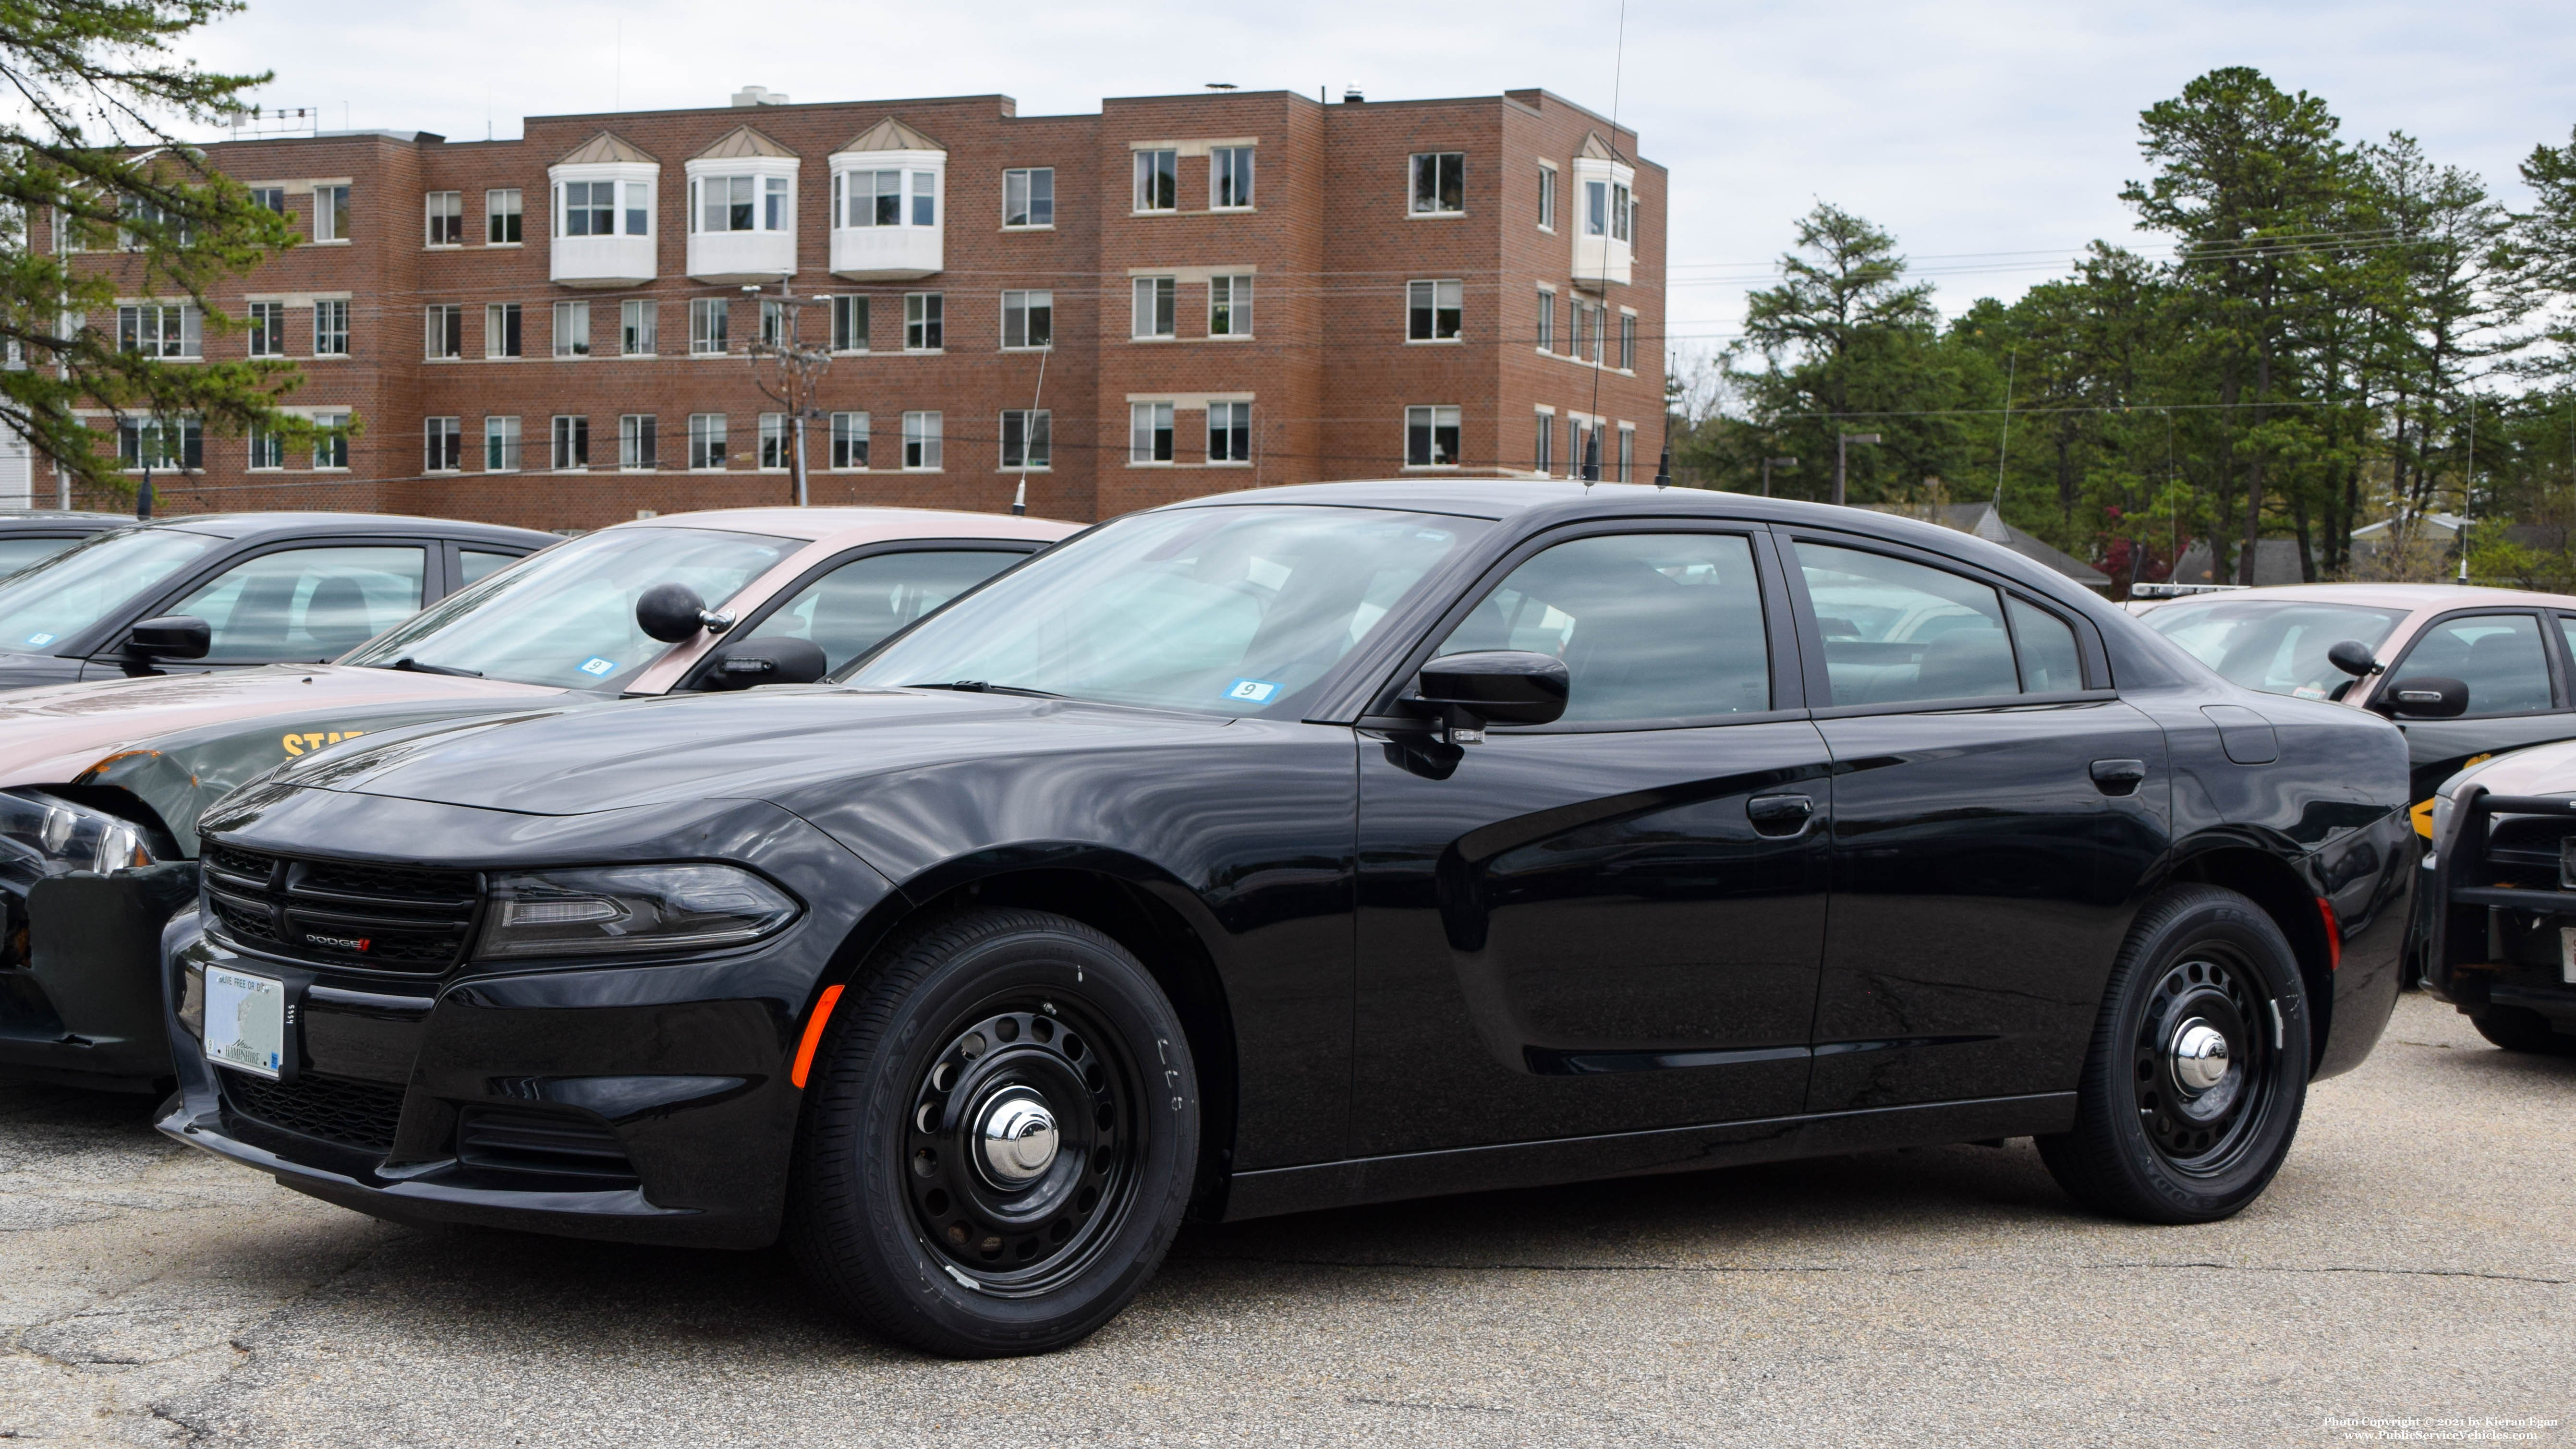 A photo  of New Hampshire State Police
            Cruiser 79, a 2020 Dodge Charger             taken by Kieran Egan